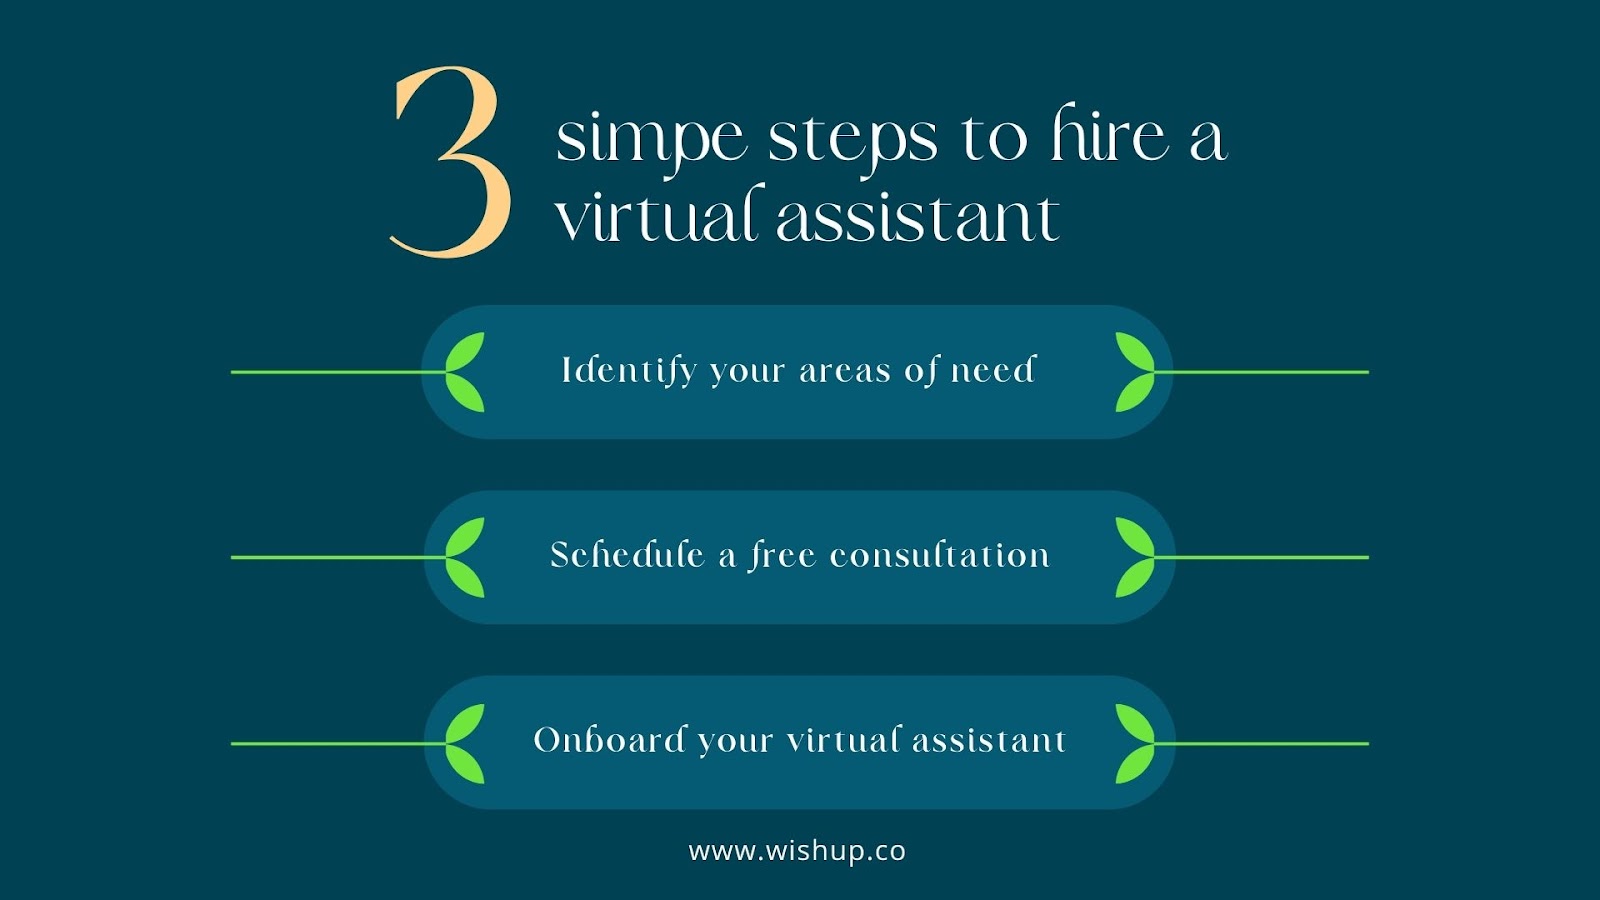 infographic on how to hire a virtual assistant
